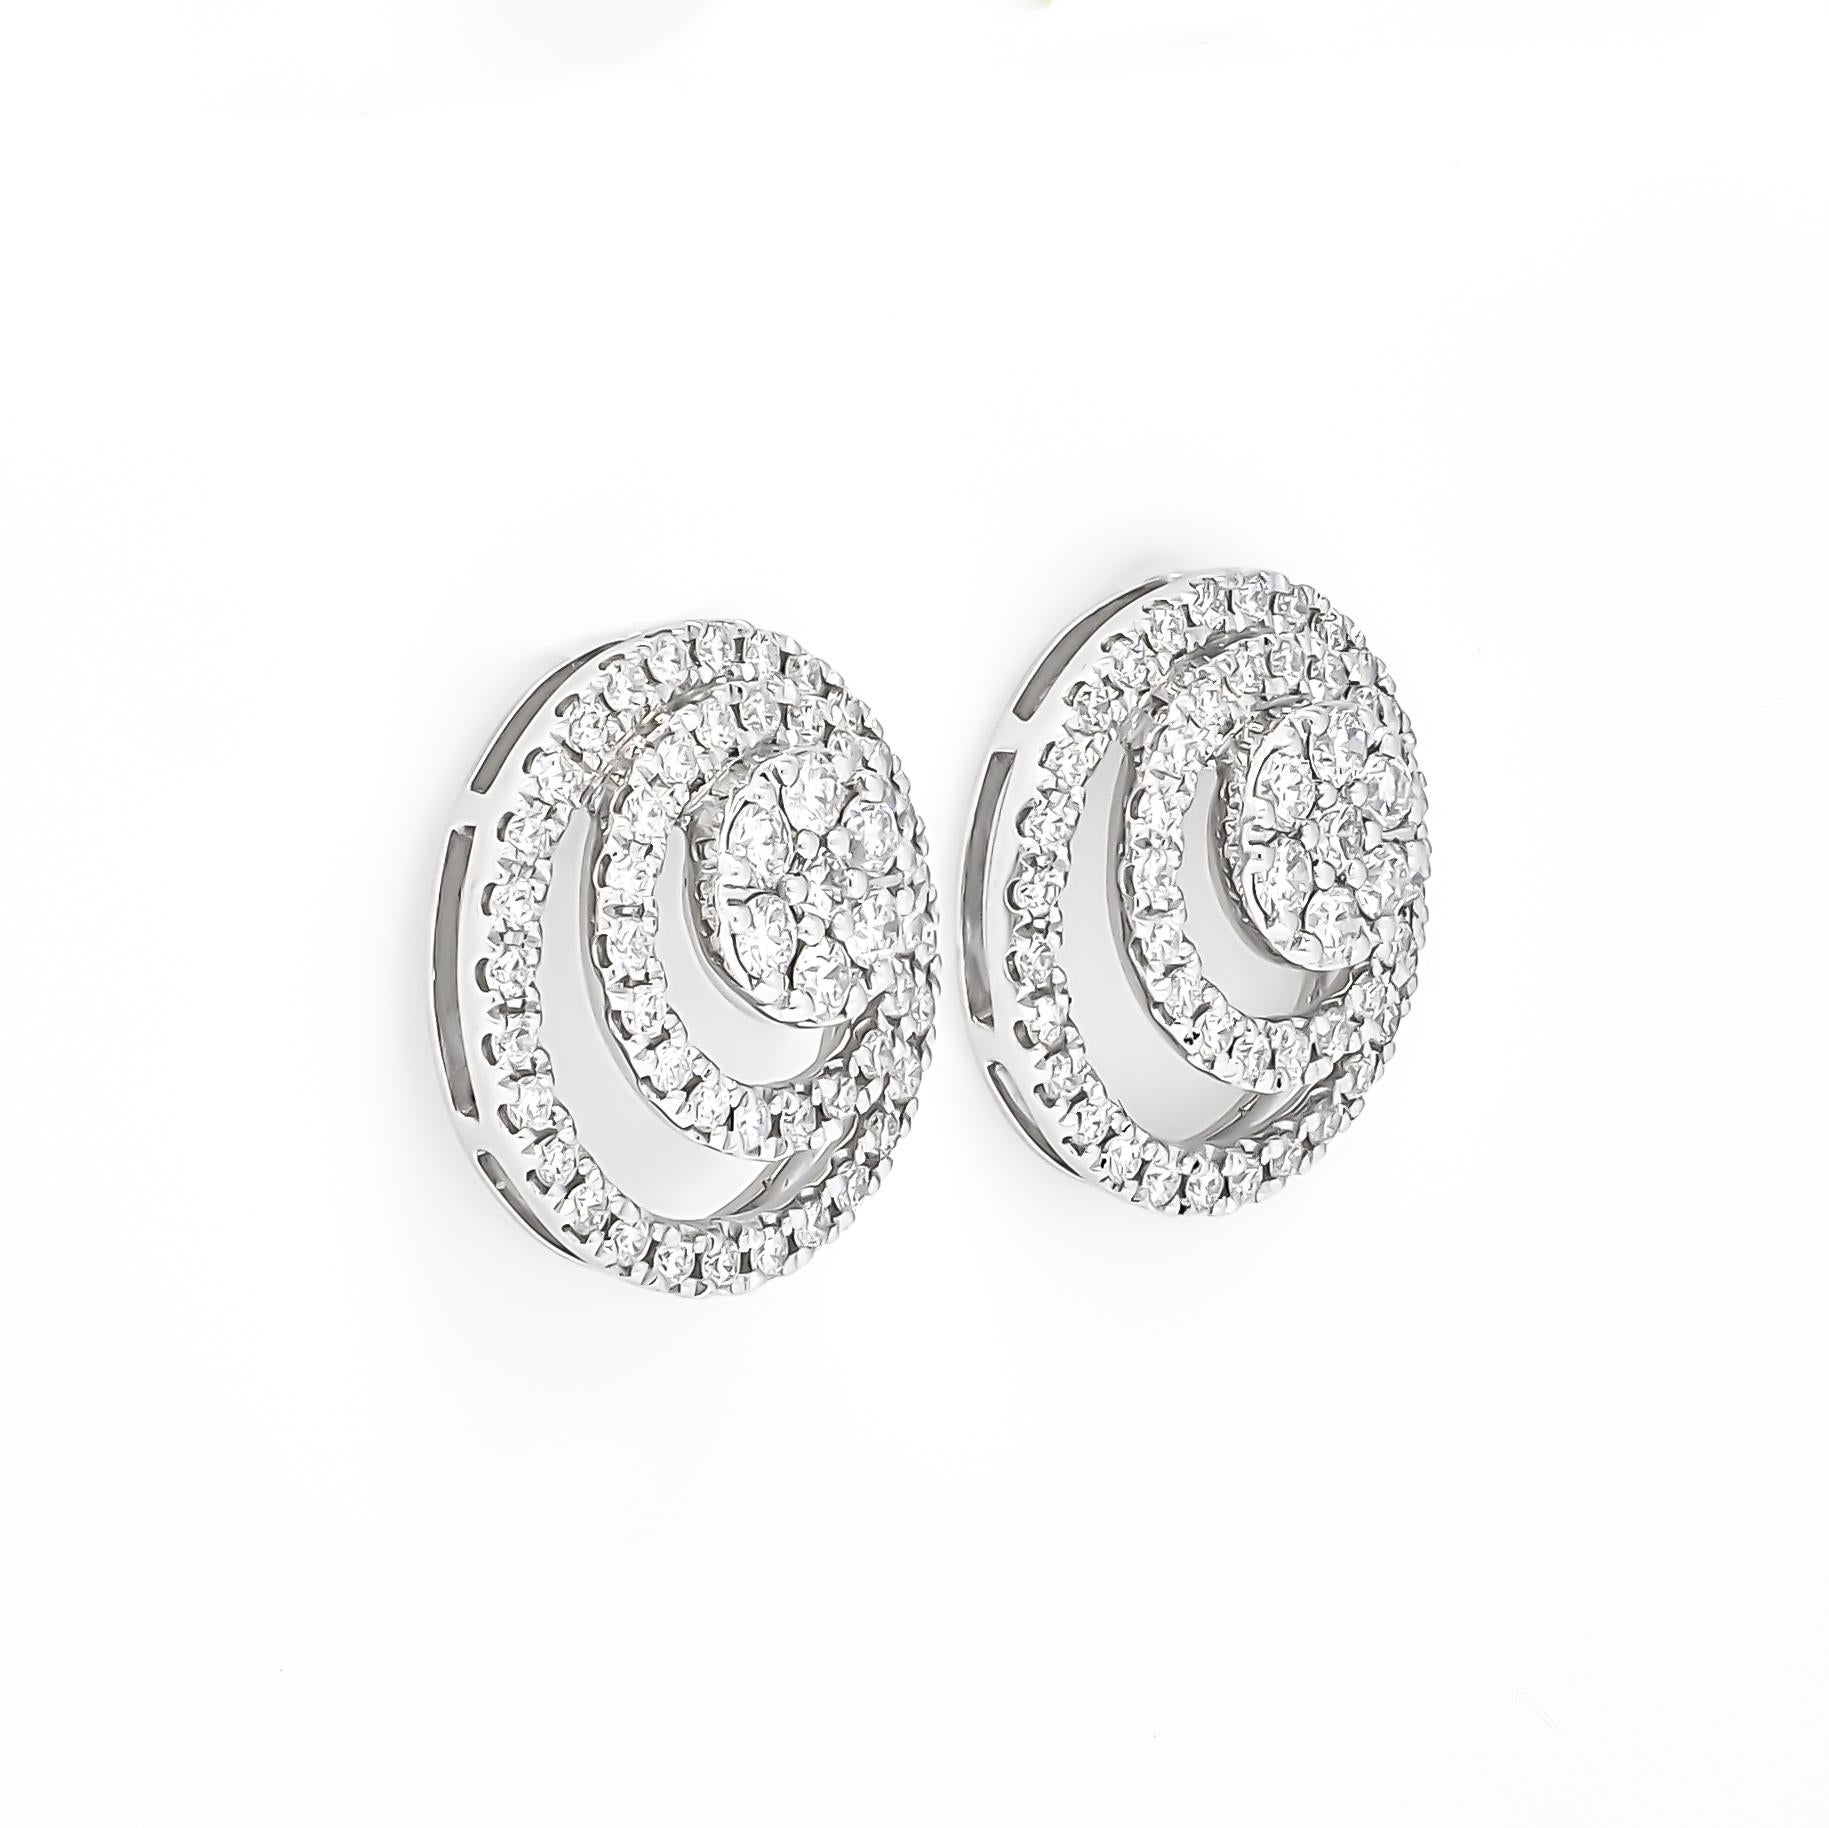 
These stunning earrings are a harmonious blend of timeless elegance and modern sophistication. Crafted with precision, they feature a captivating floral cluster design, beautifully encrusted with shimmering diamonds. The double halo adds an extra